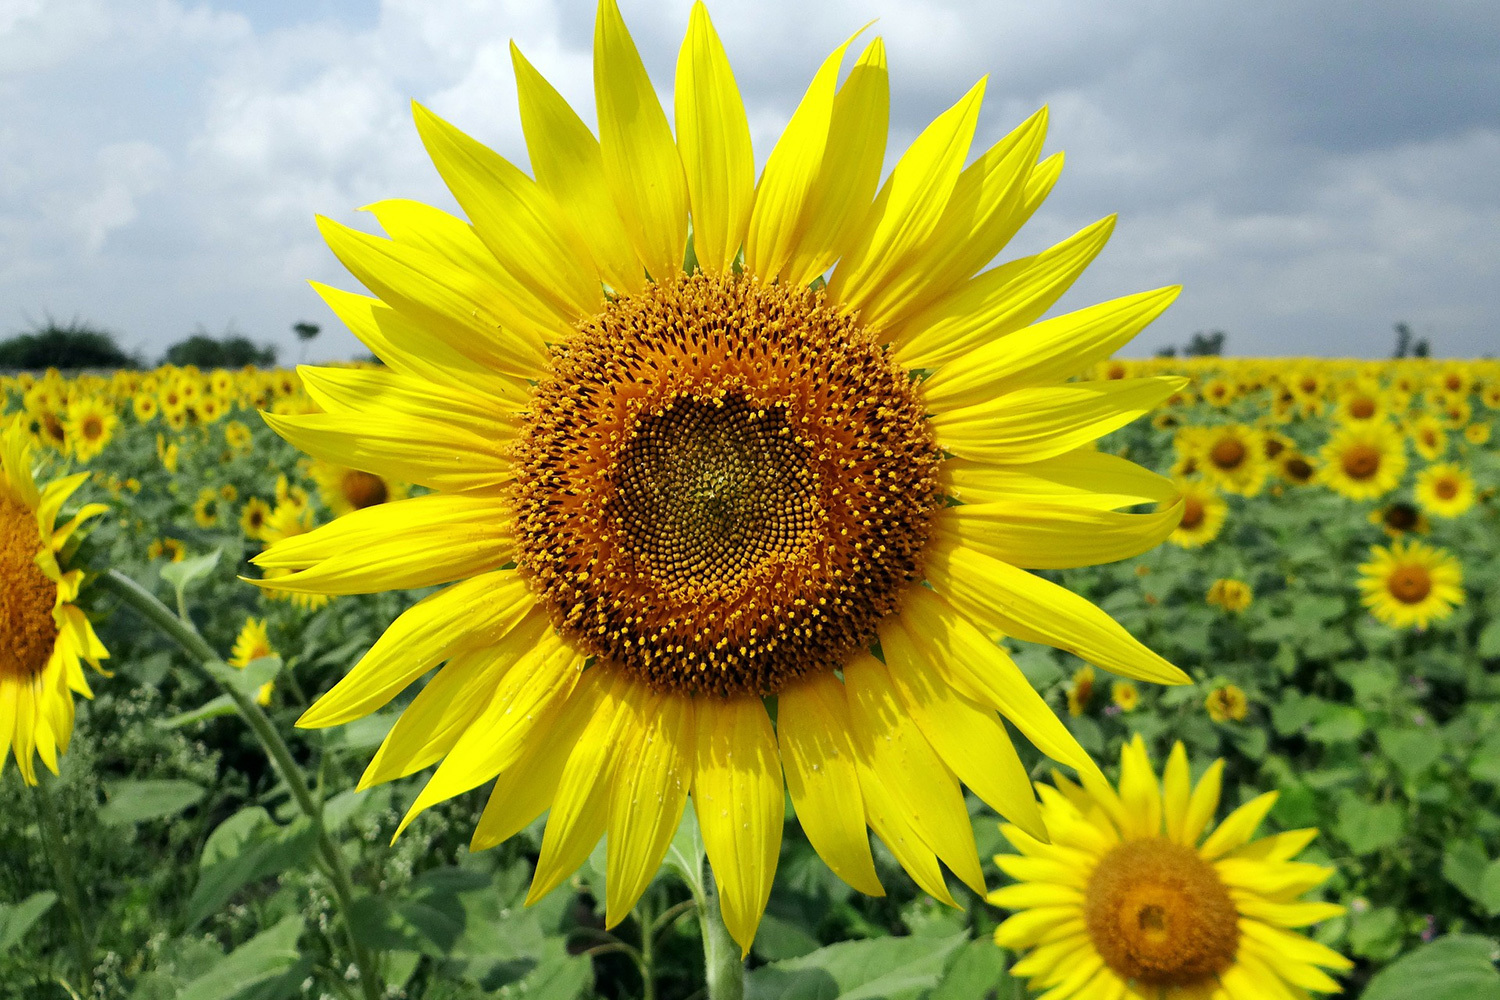 <span style="font-weight: bold;">Sunflower</span><br>